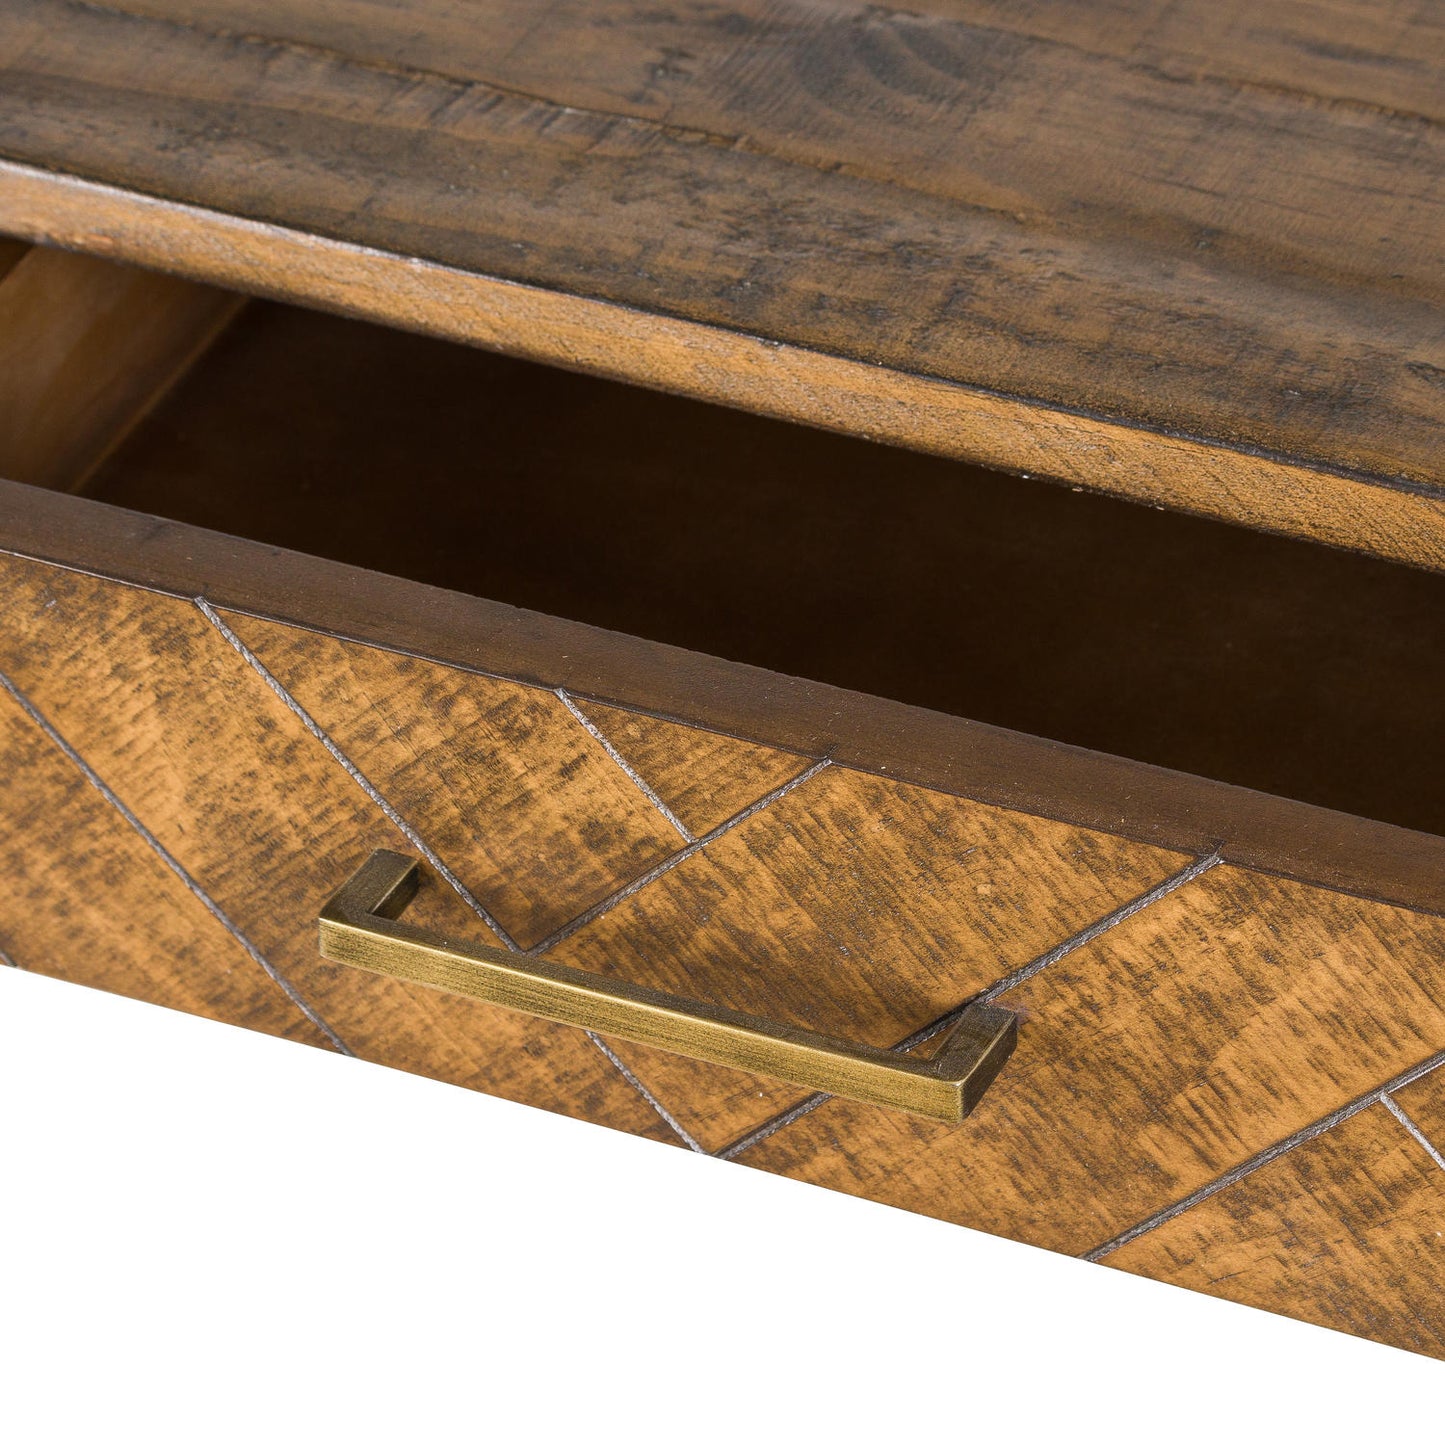 Hill Interiors Havana Gold 2 Drawer Console Table